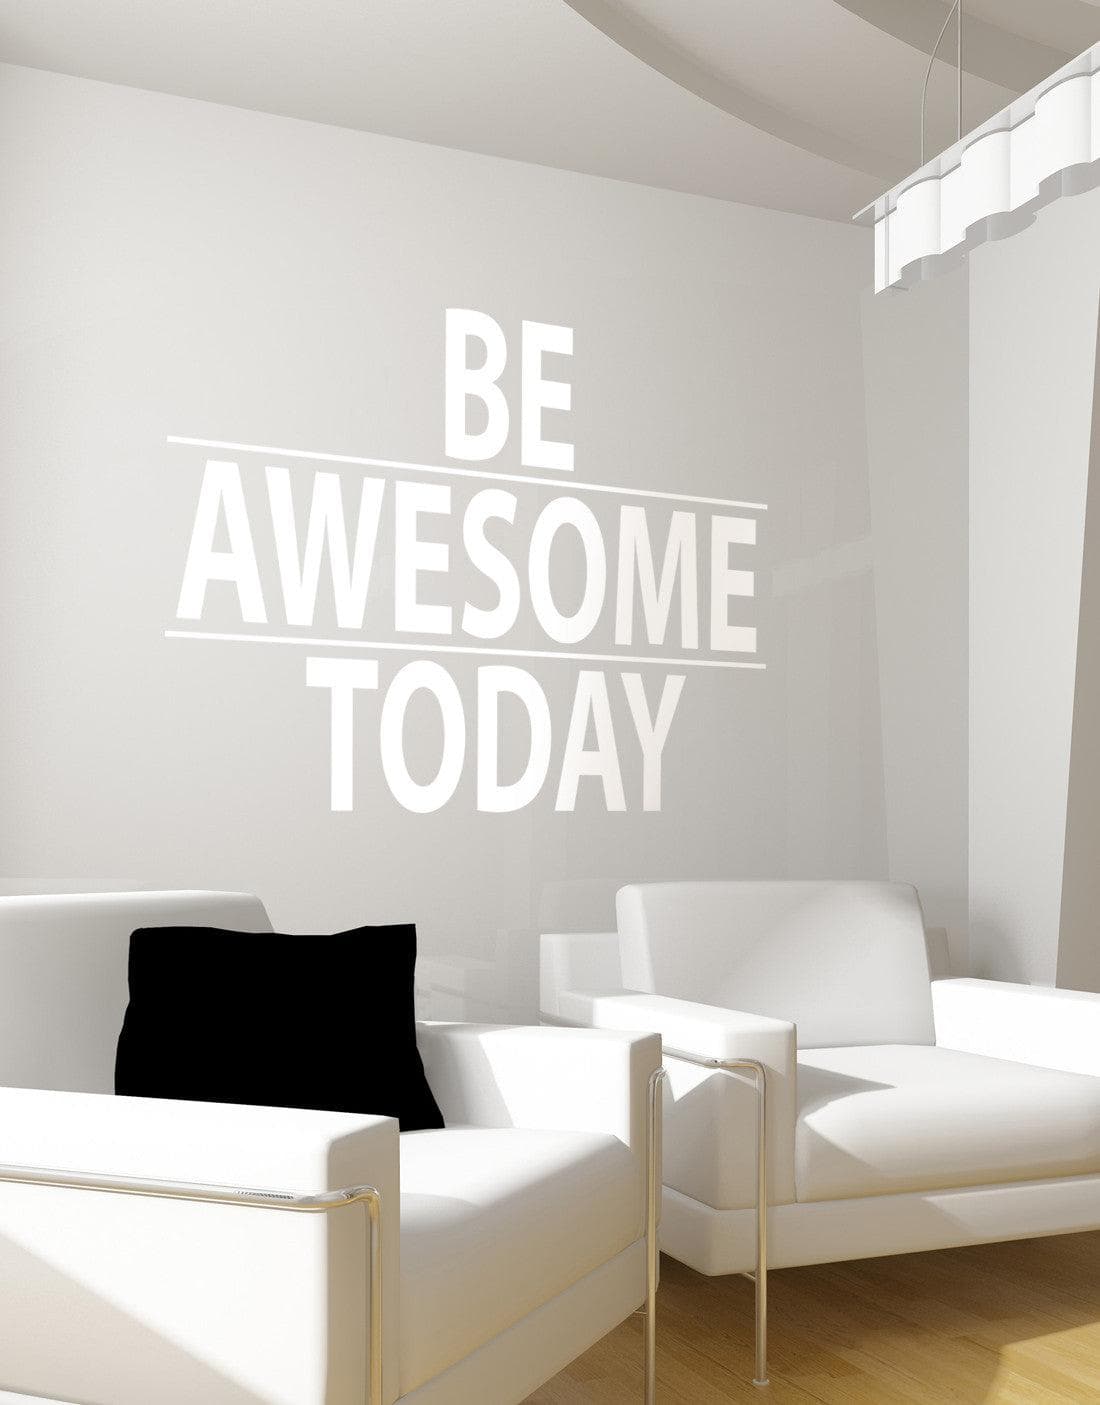 A white text decal saying "BE AWESOME TODAY" on a gray wall above two white chairs.